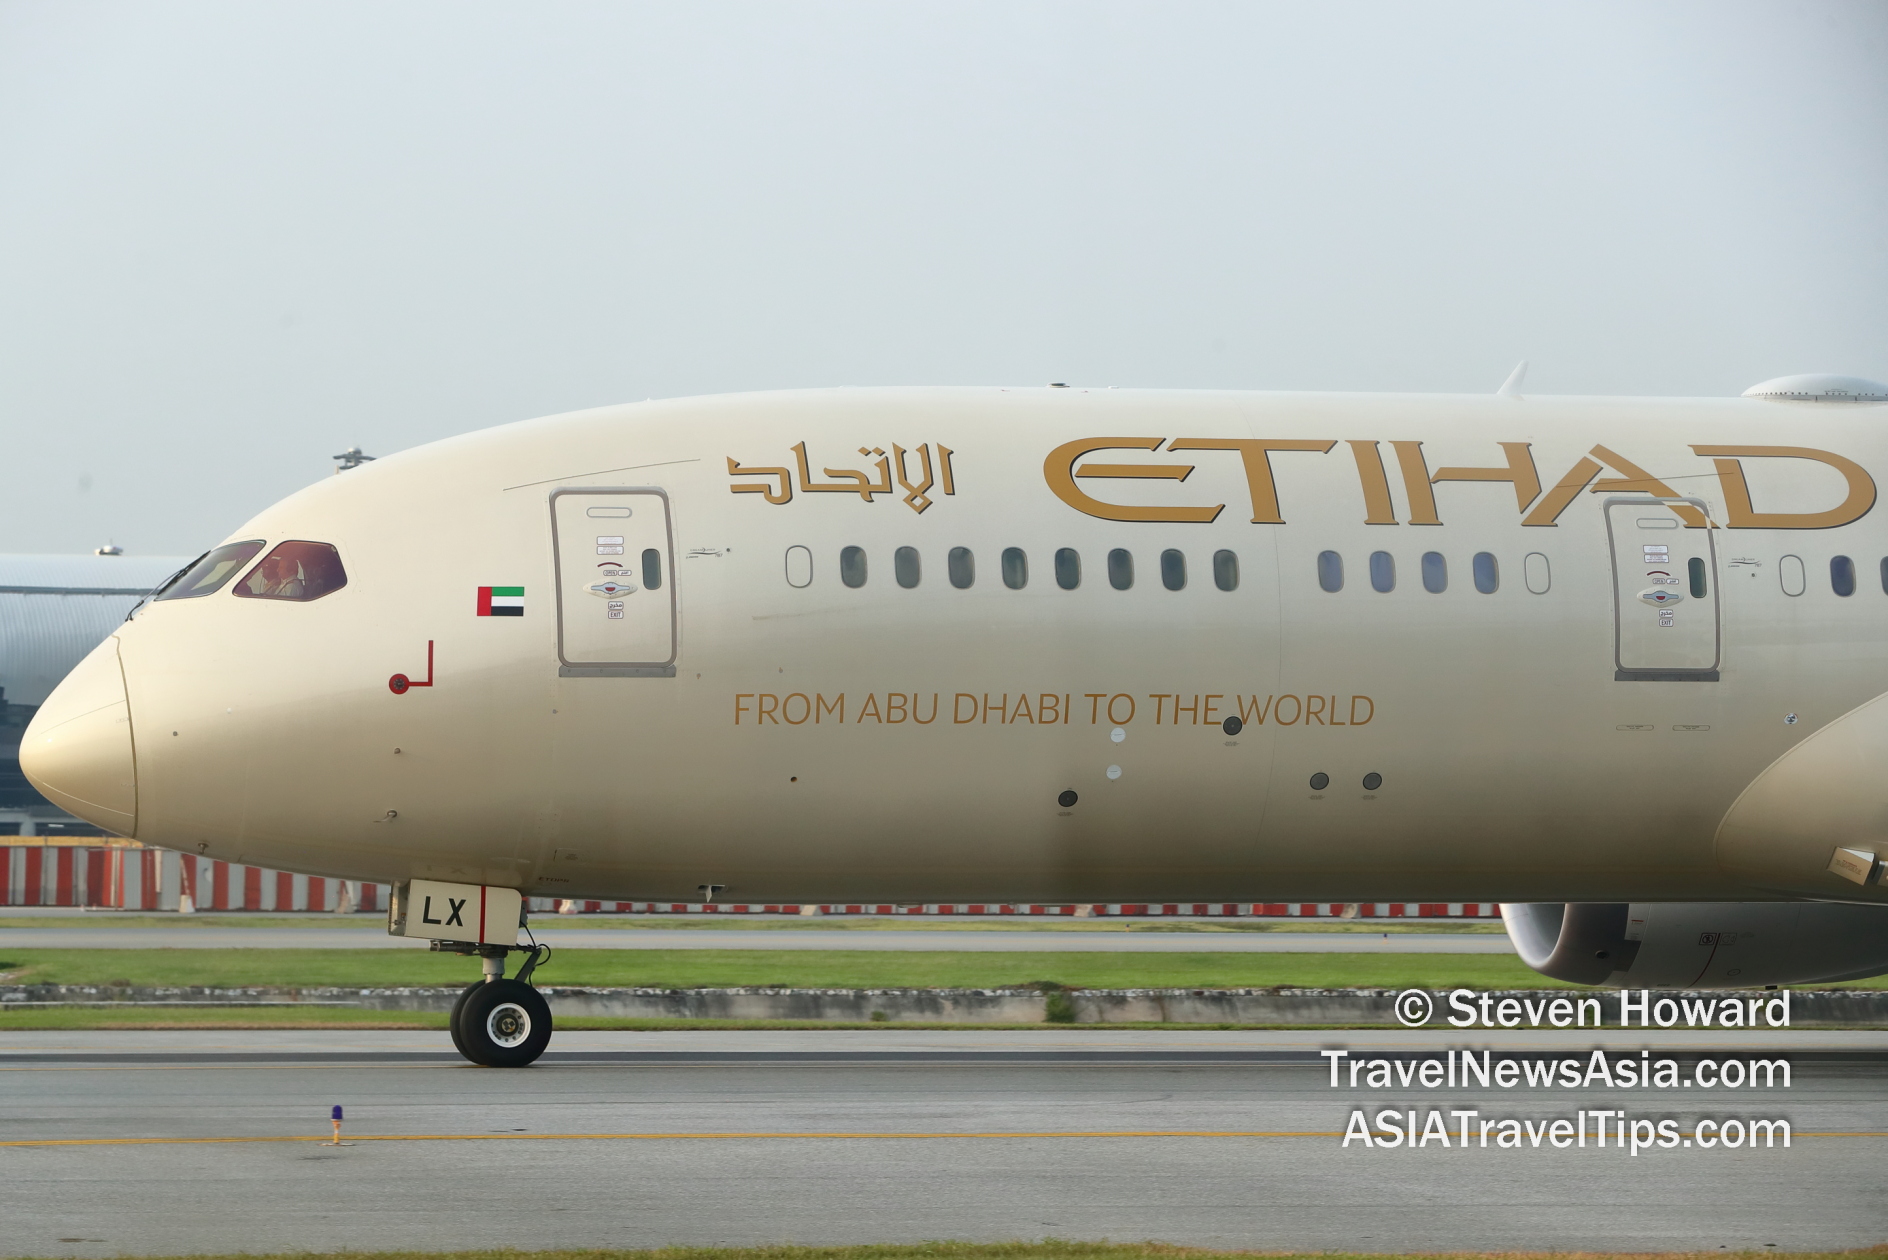 Etihad Airways Boeing 787-9 reg: A6-BLX. Picture by Steven Howard of TravelNewsAsia.com Click to enlarge.